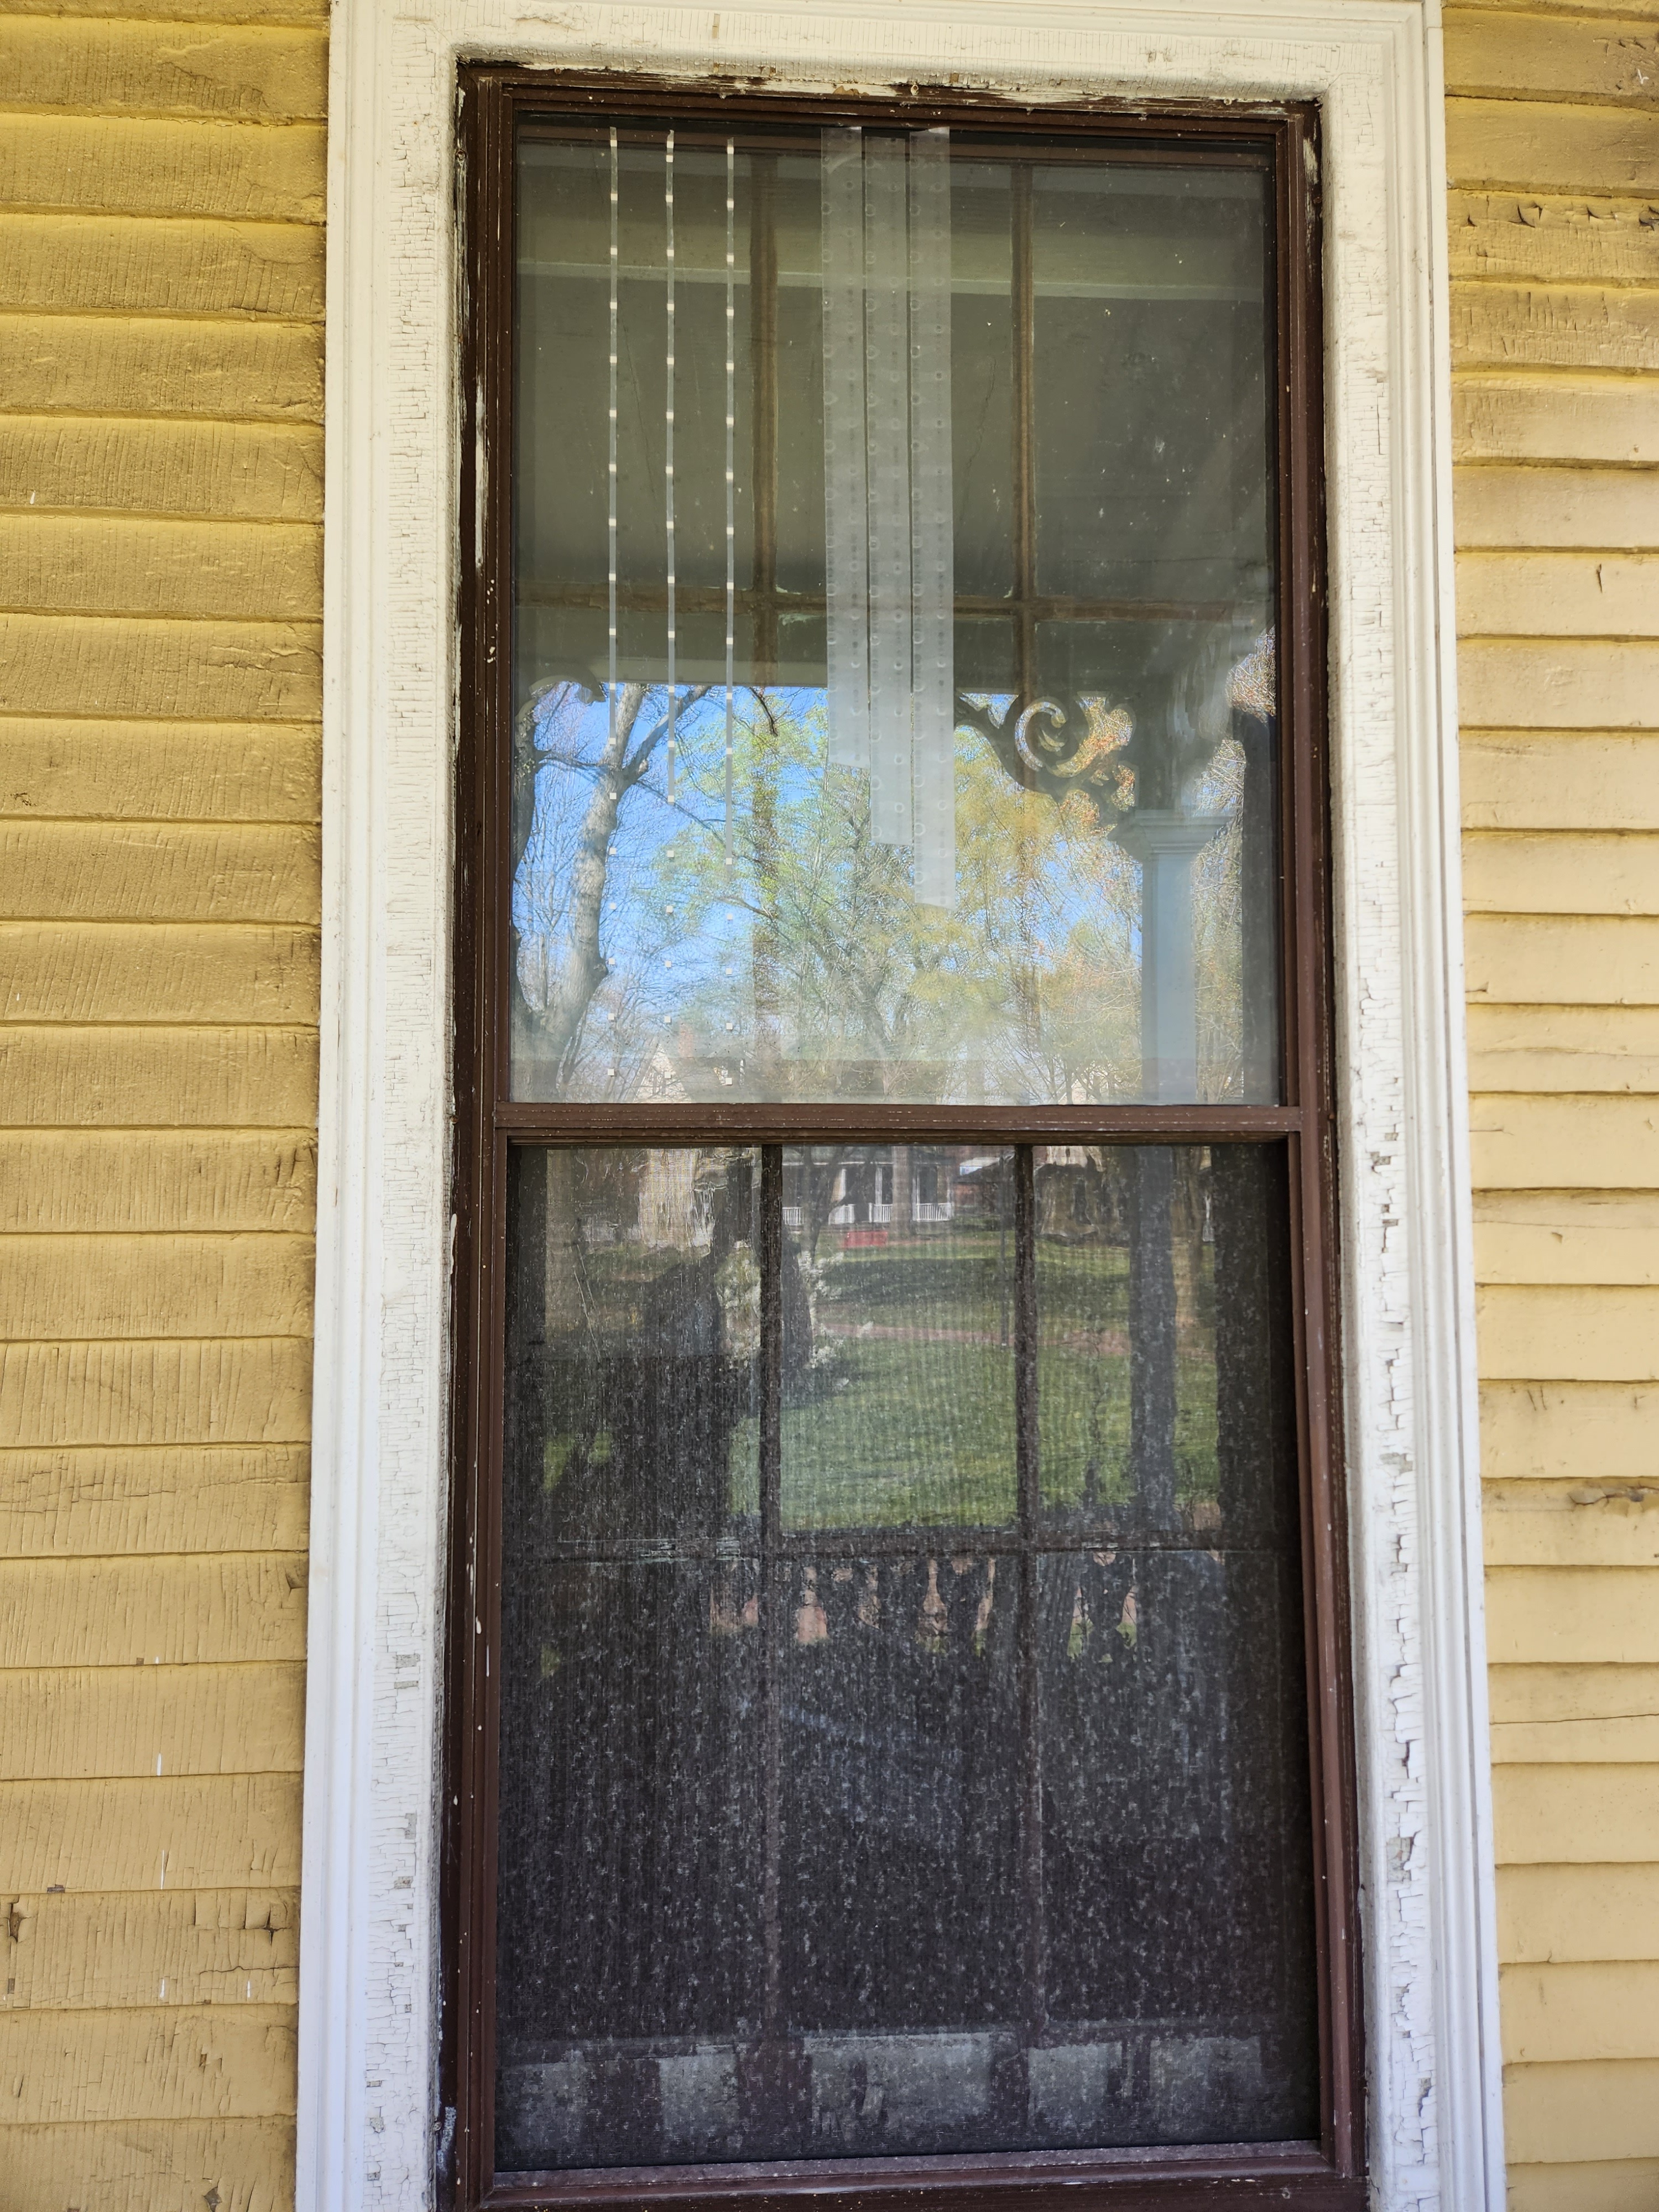 An image of a window of NYC Audubon's seasonal environmental center on Governors Island treated by window tape.